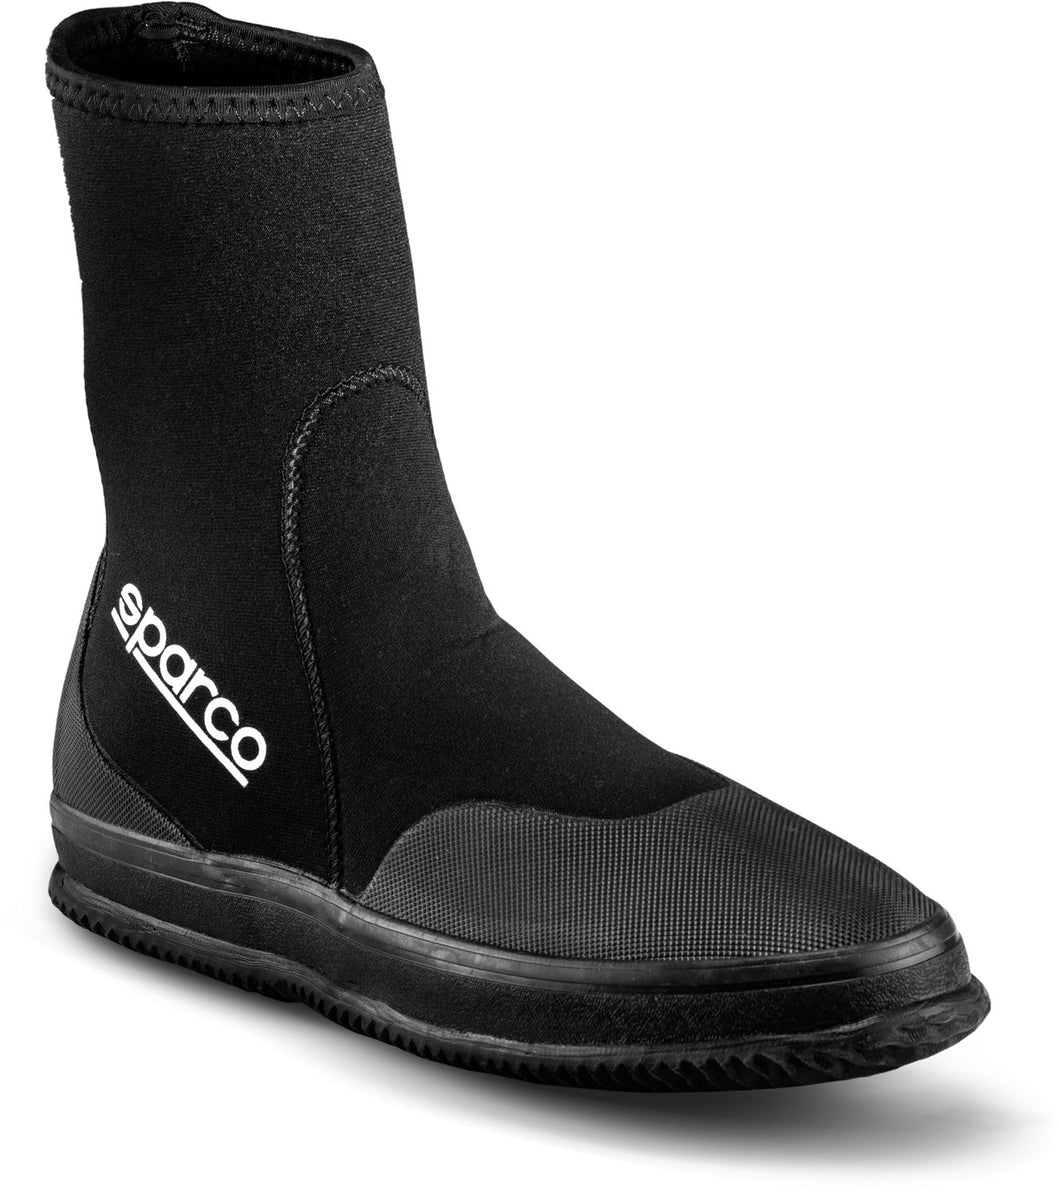 Sparco neoprene shoes